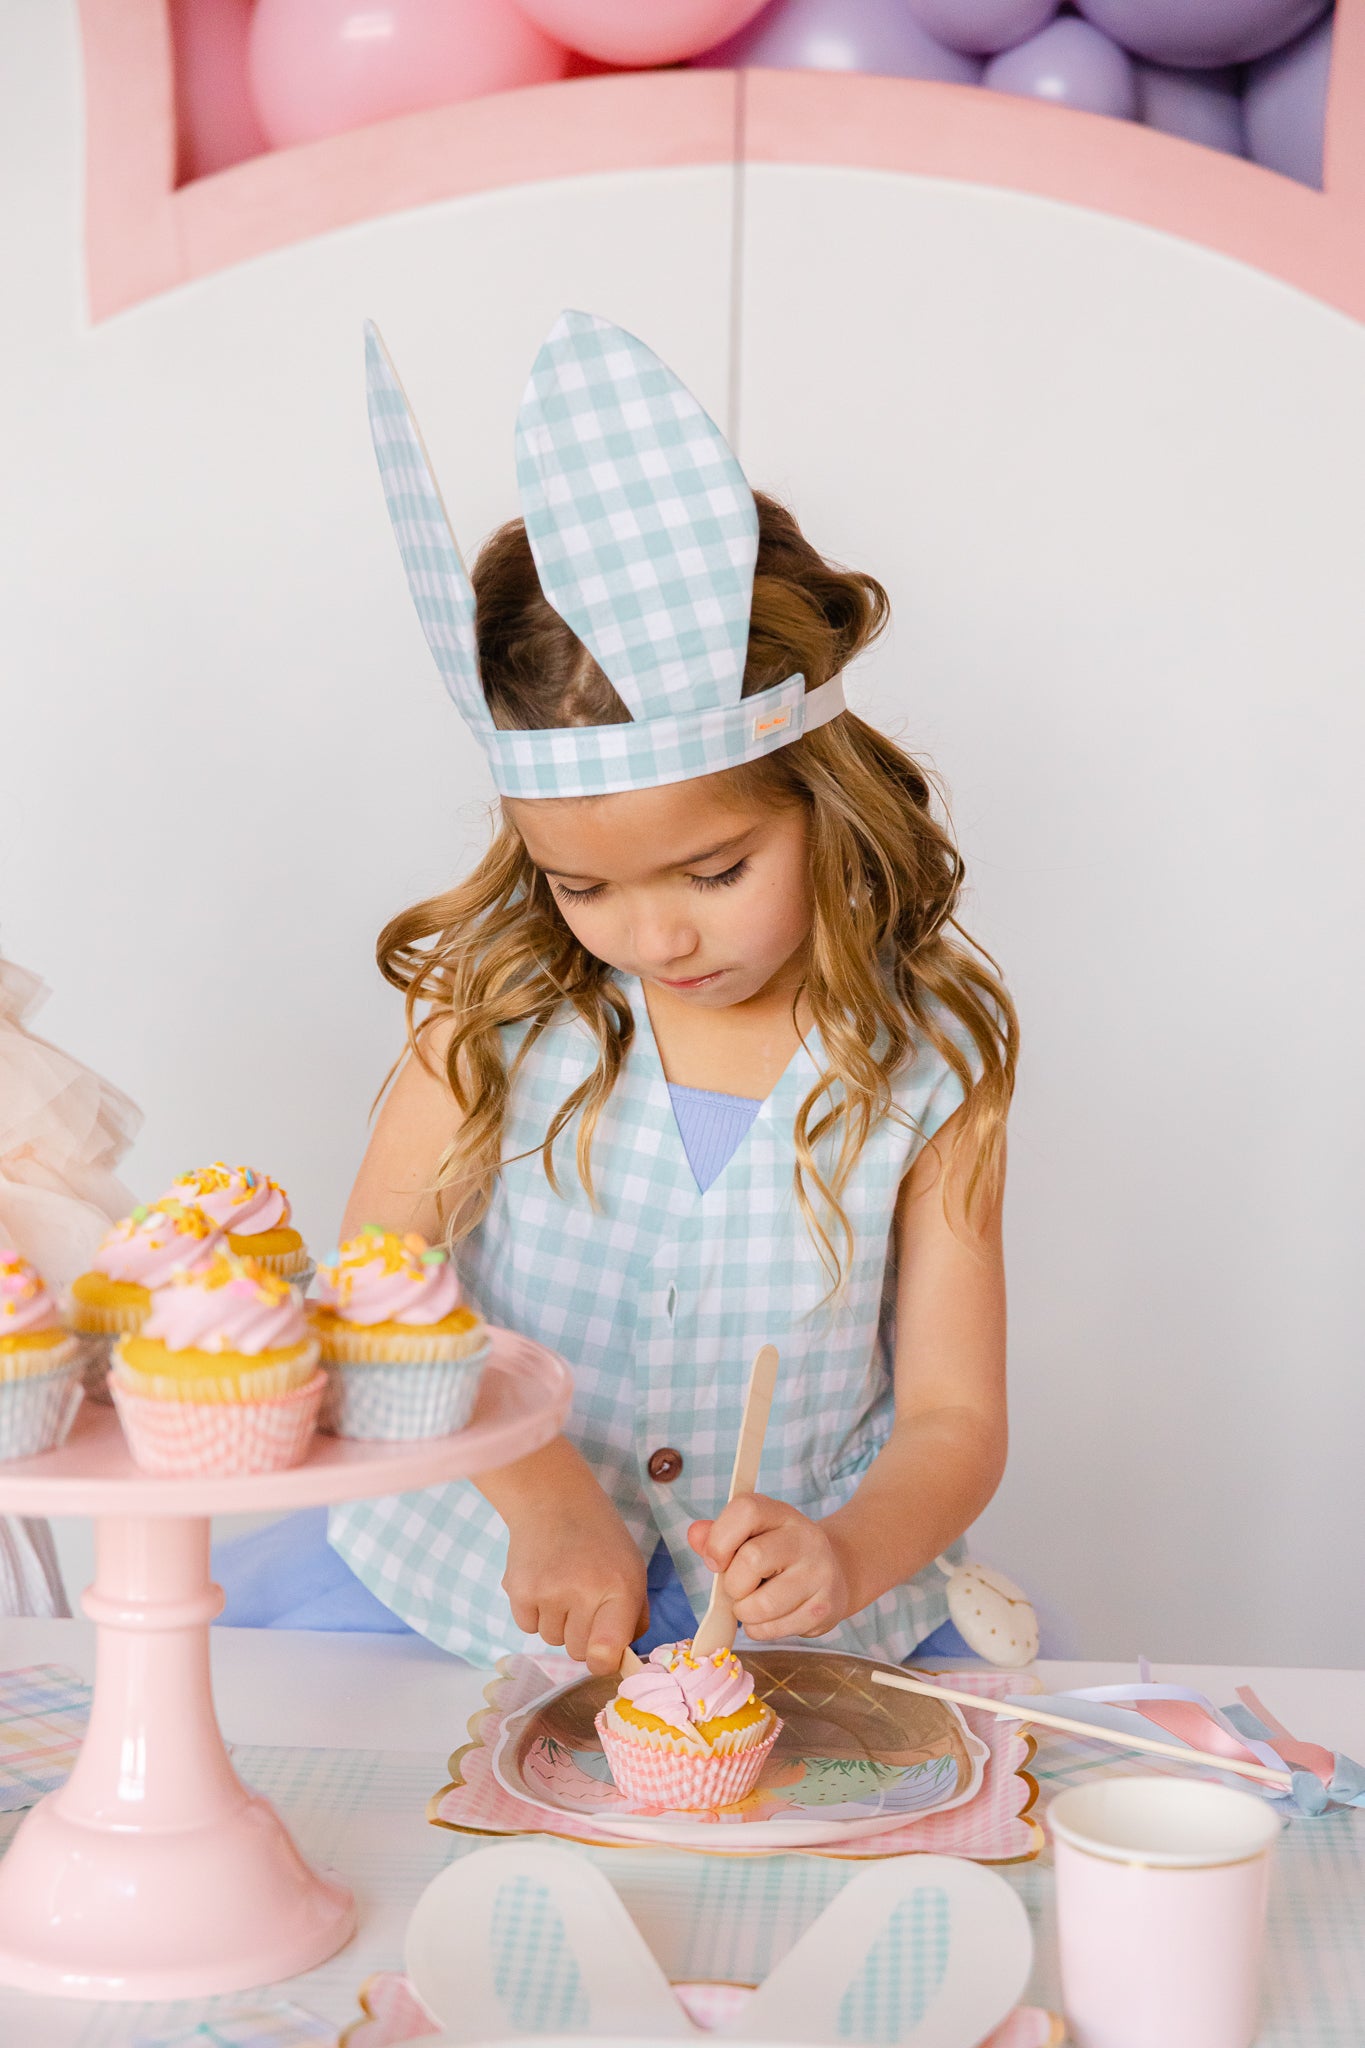 Easter cupcakes make a wonderful Easter treat ideas for kids.